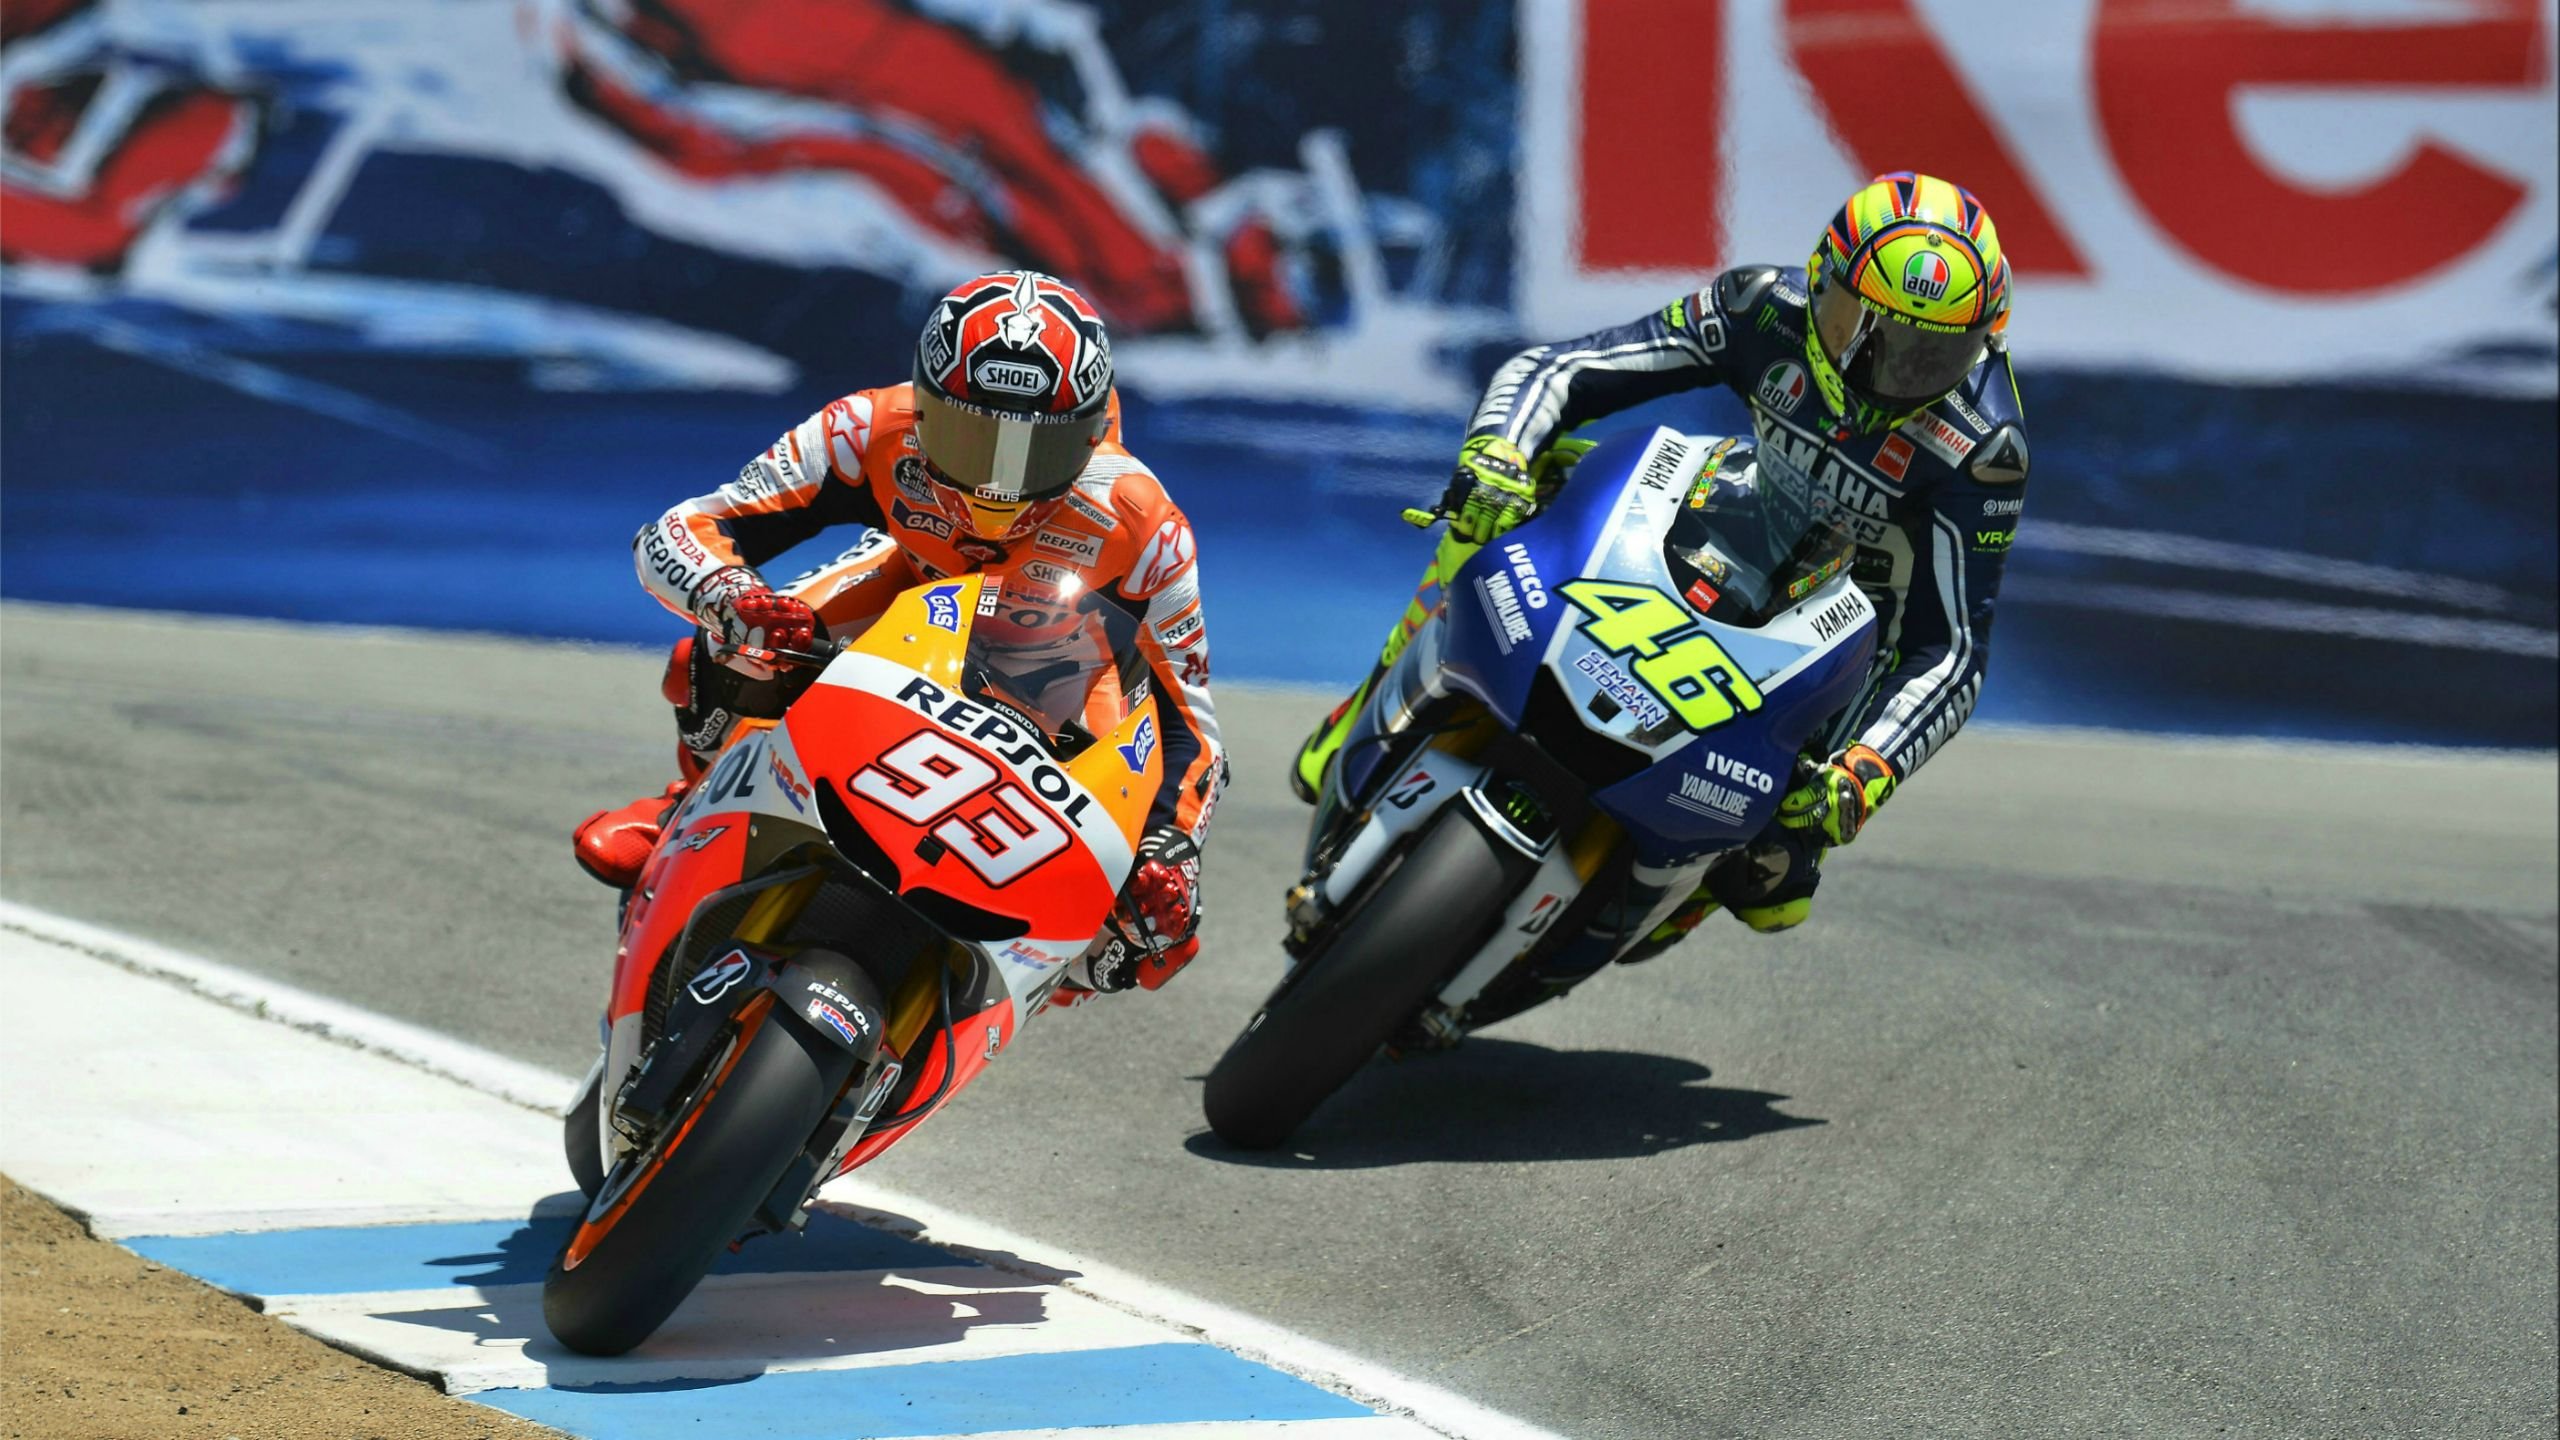 Rossi 4k Wallpapers For Your Desktop Or Mobile Screen Free And Easy To Download